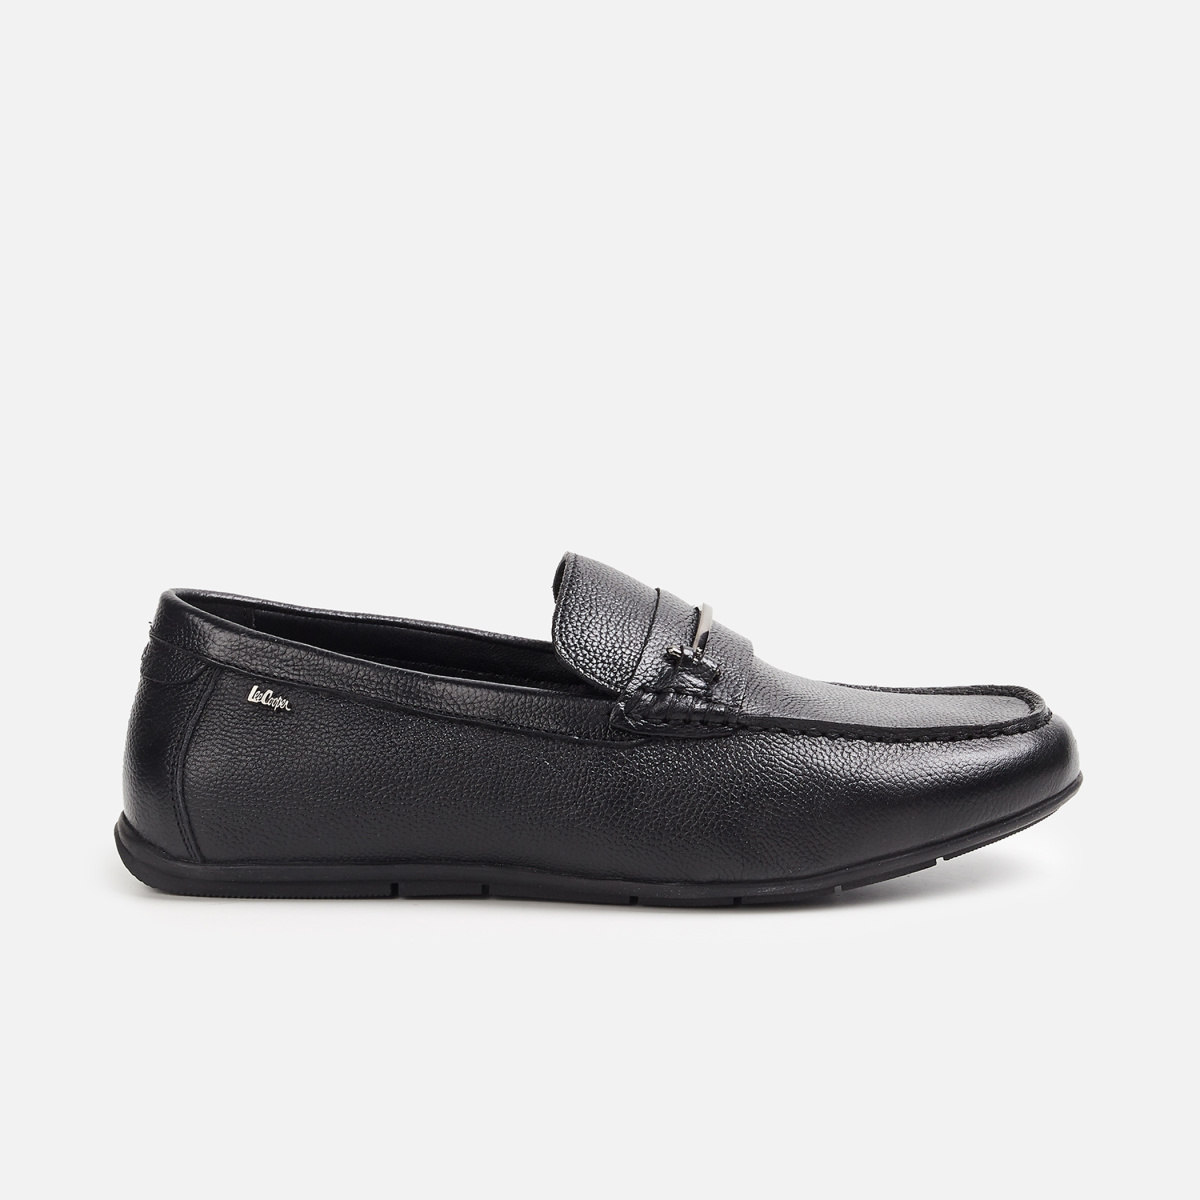 LEE COOPER Men Solid Leather Slip-On Casual Shoes